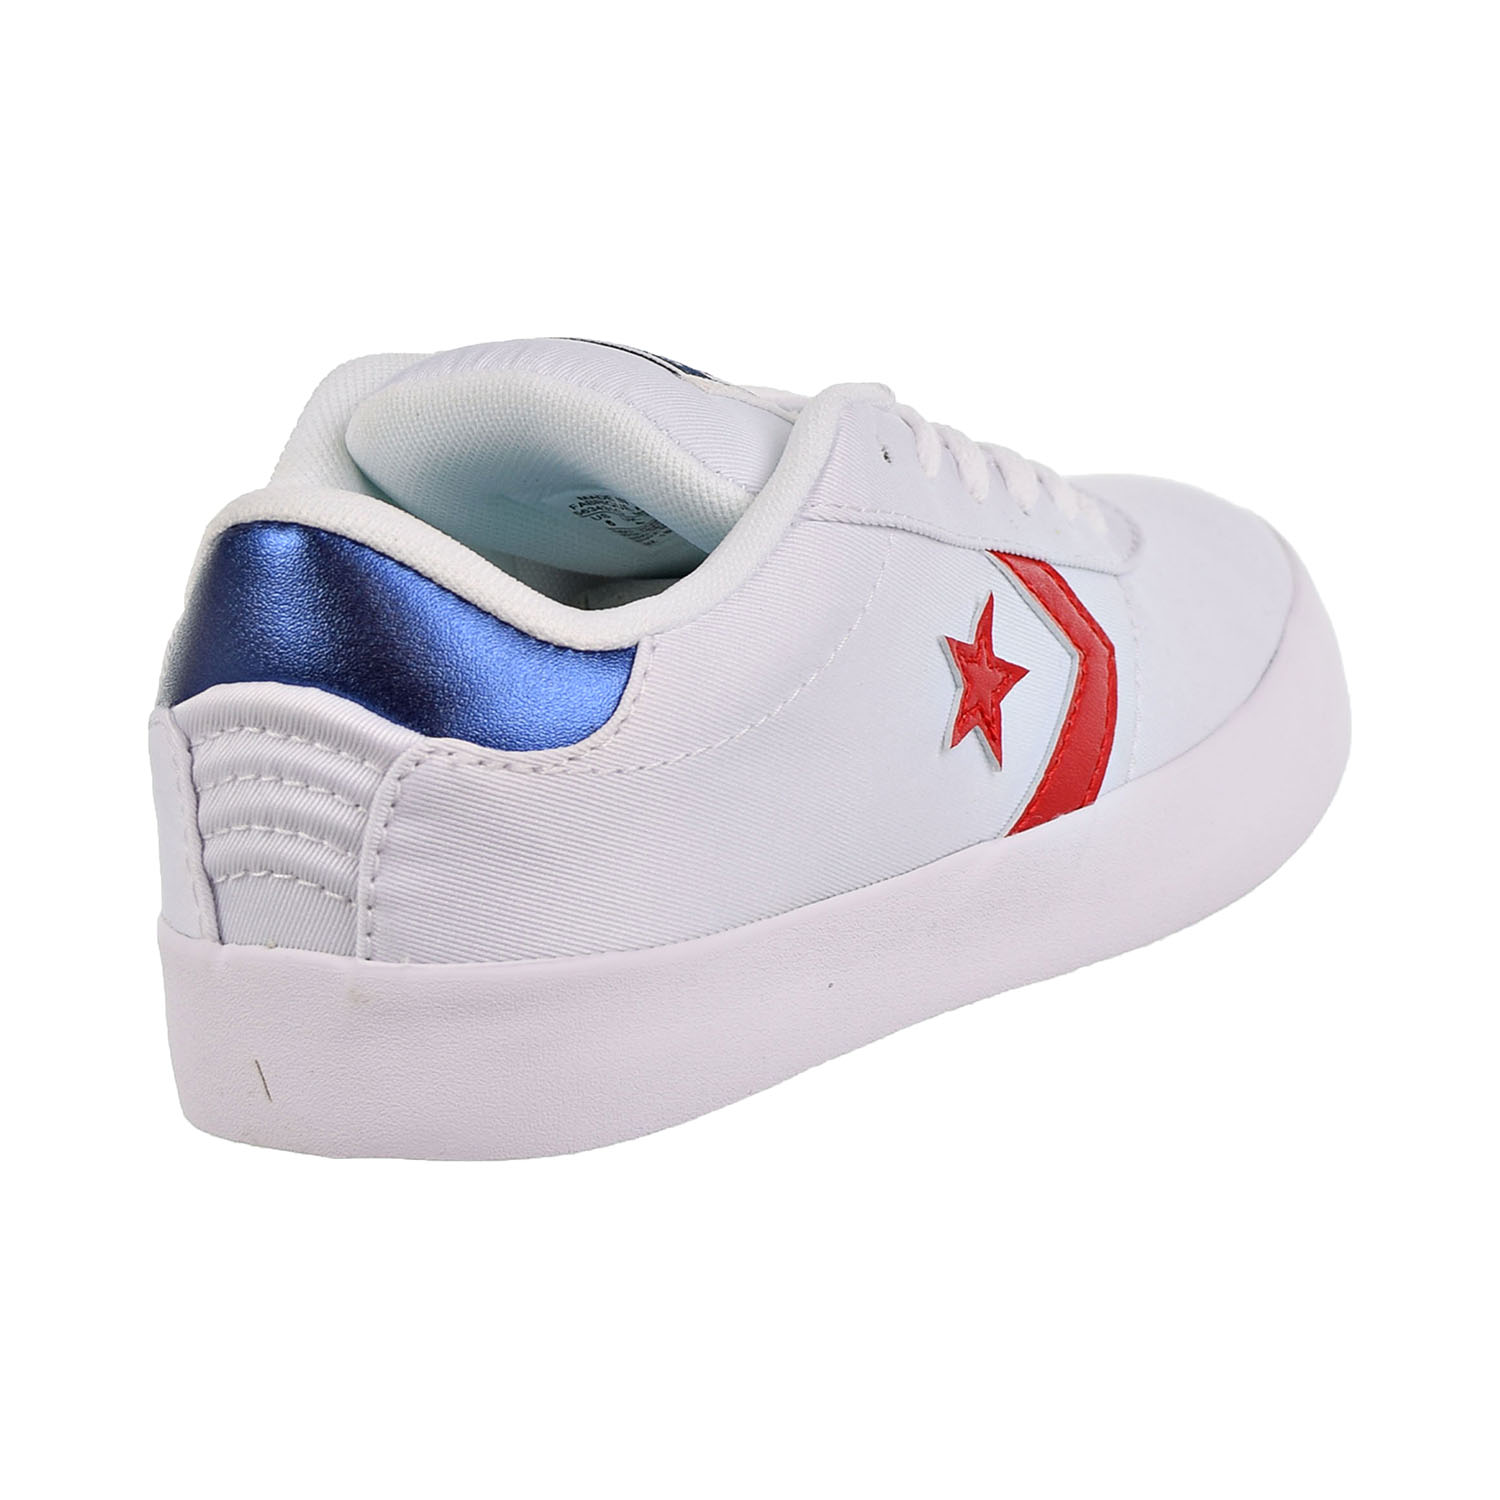 Converse Point Star Ox Women's Shoes 